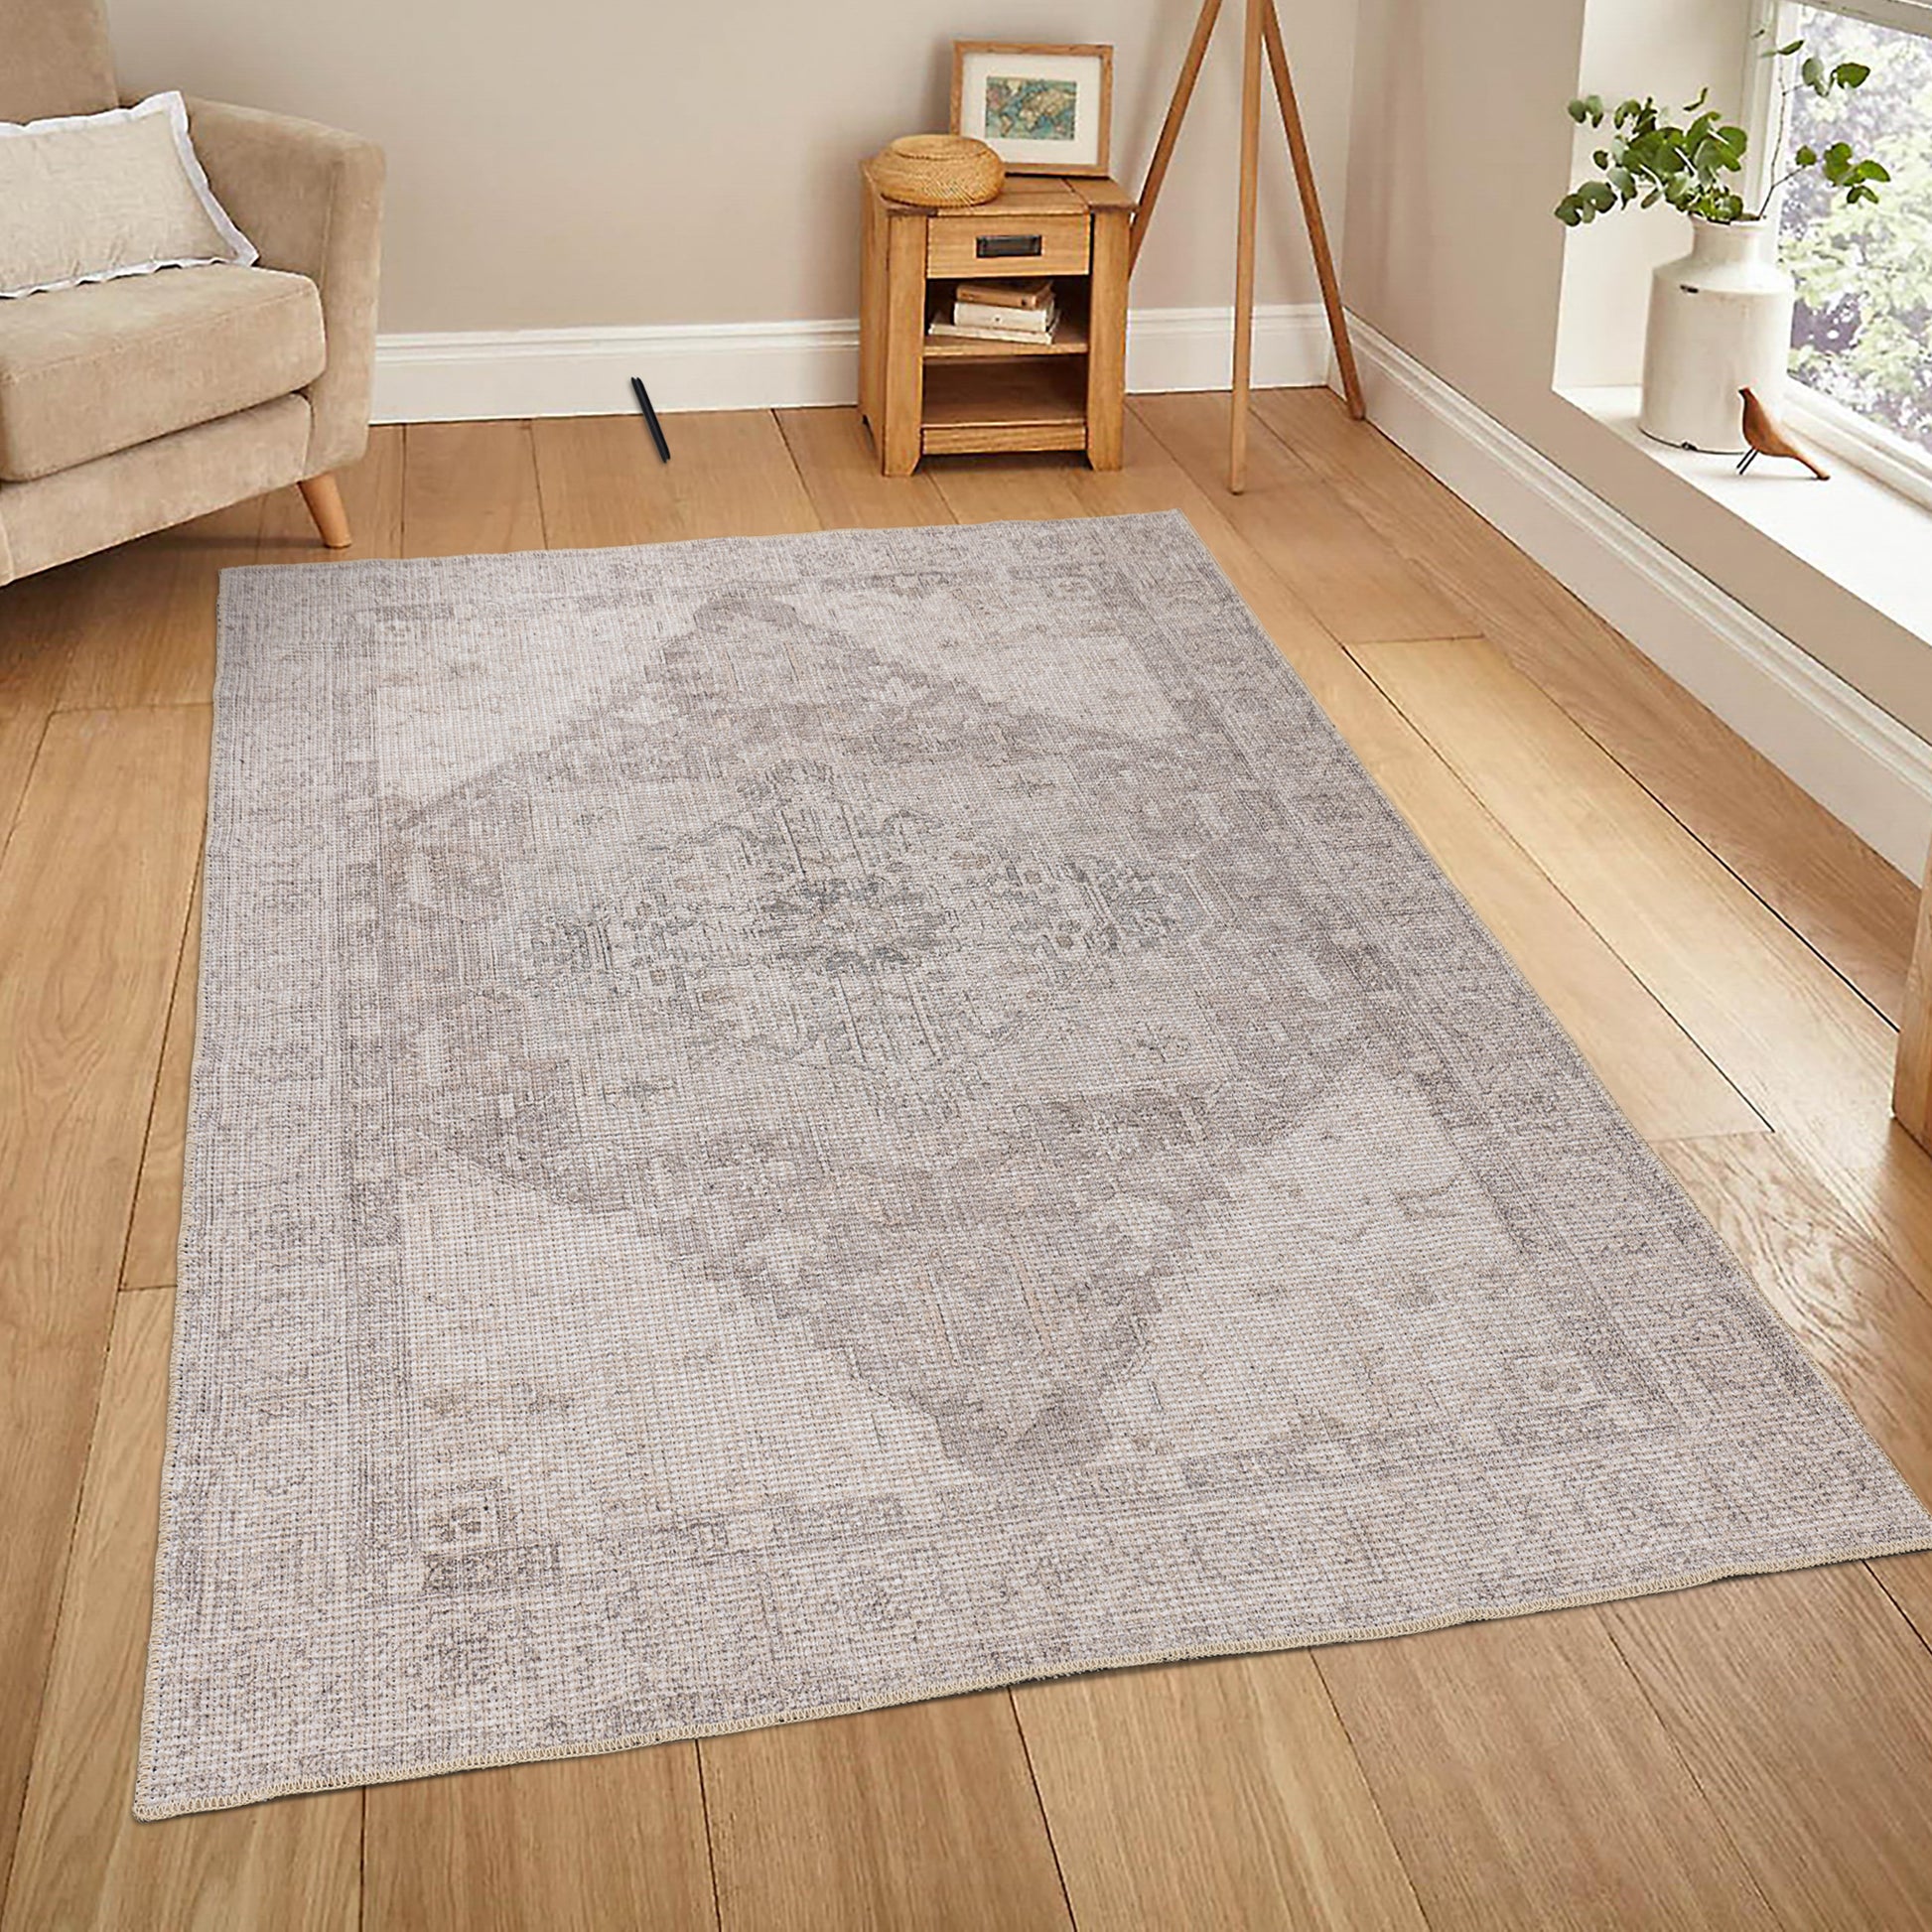 ivory bordered cotton and polyster machine washable traditional rustic area rug 5x7, 5x8 ft Contemporary, Living Room Carpet, Bedroom, Home Office